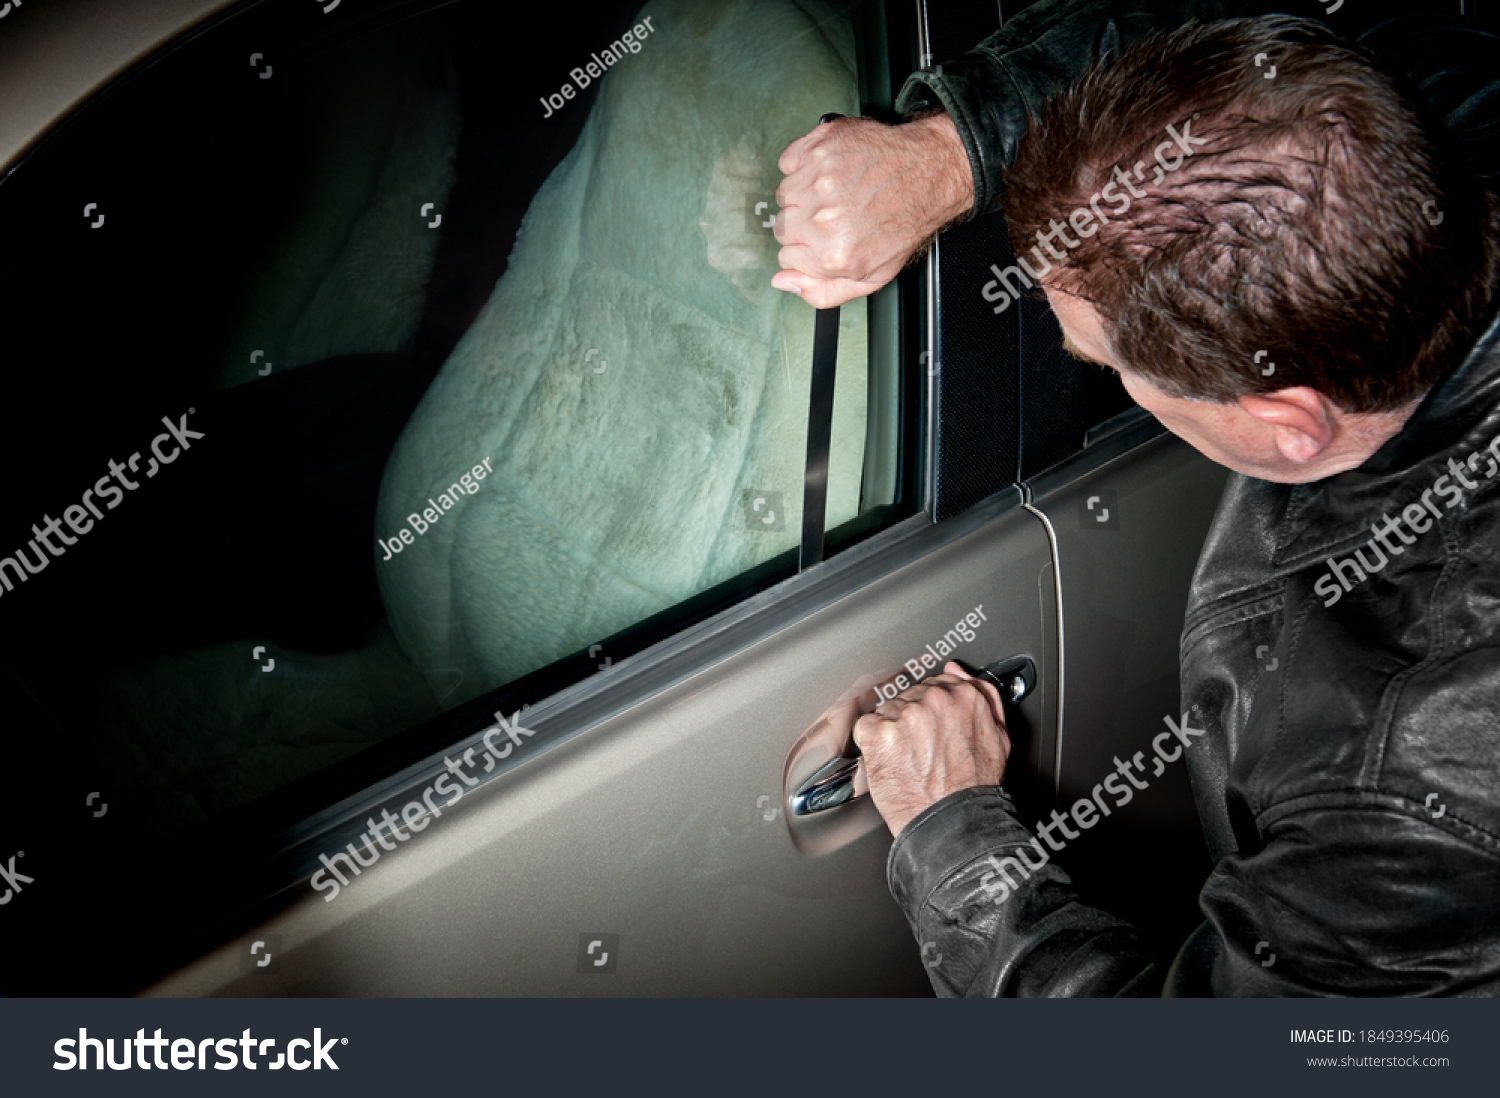 A male car thief uses a flat metal lock pick to break into a vehicle. #1849395406